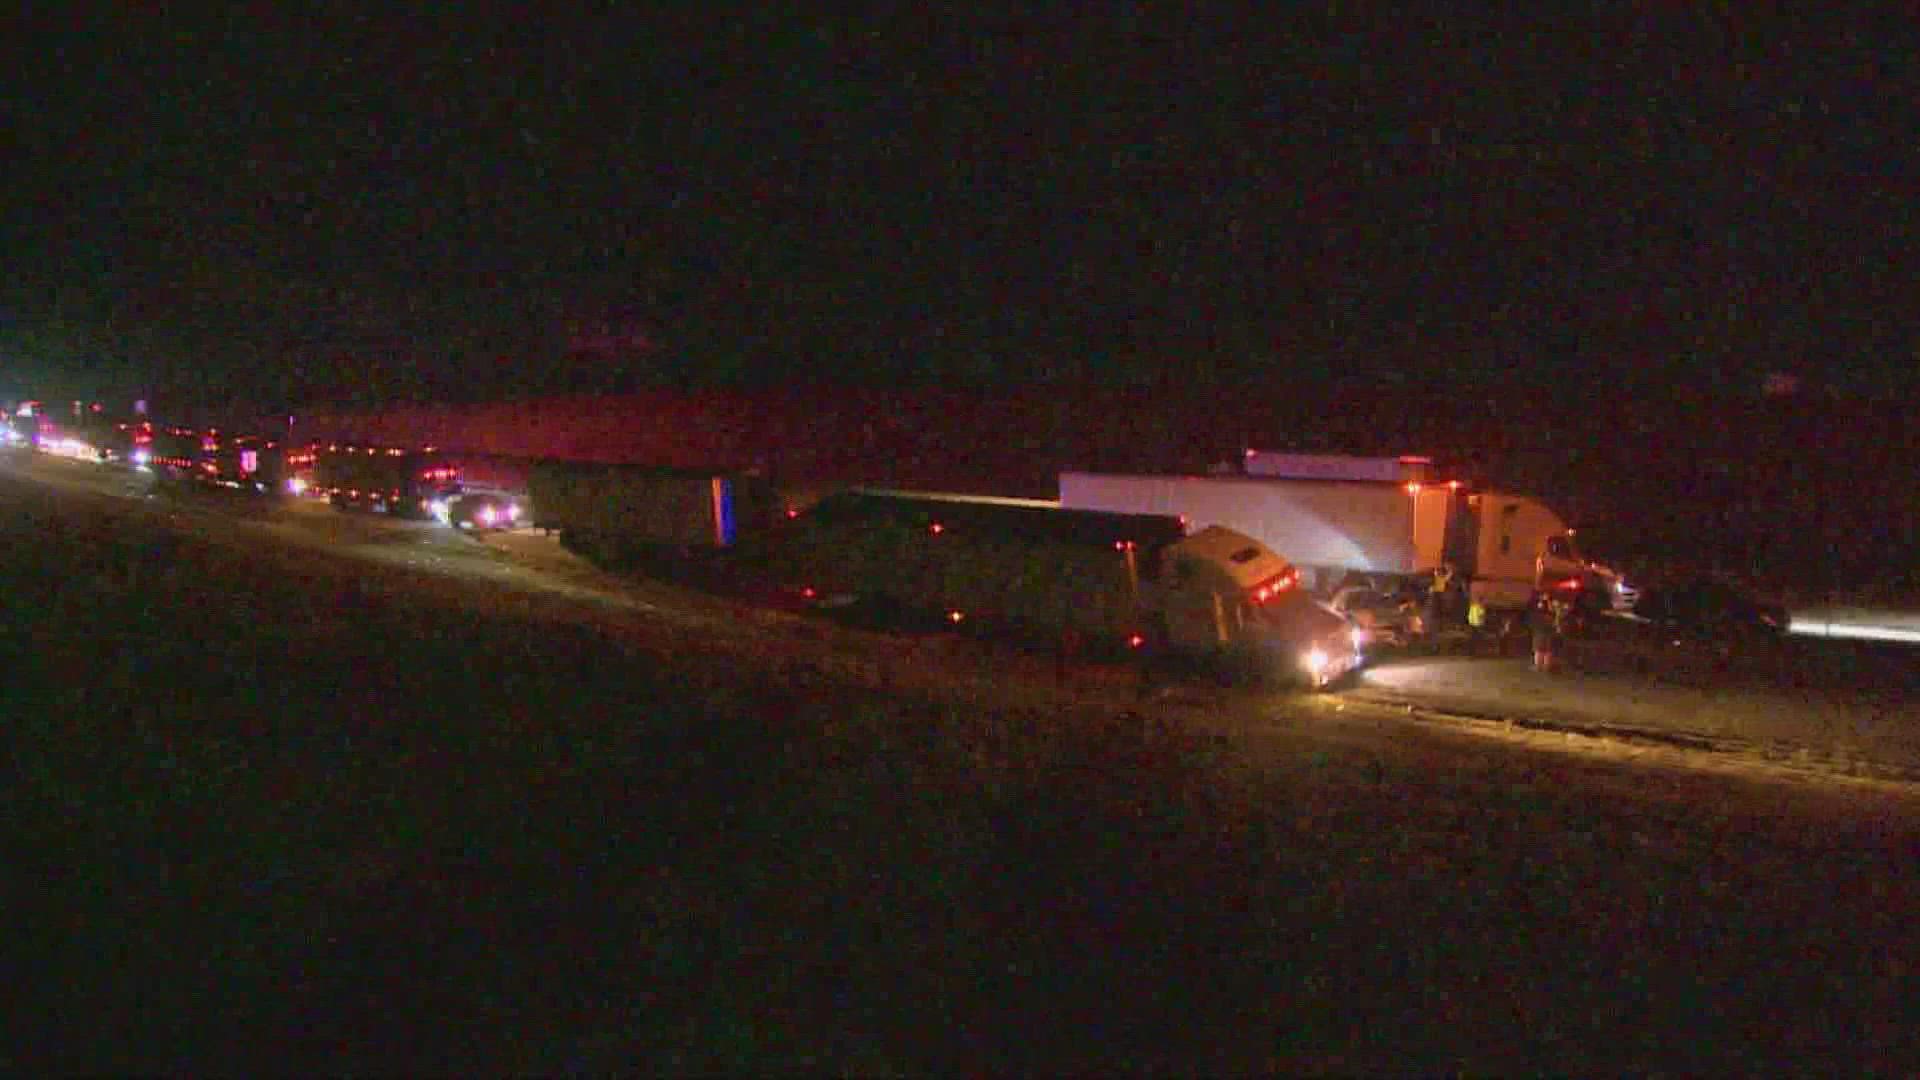 The crash happened around 11 p.m. Monday on westbound I-20 on a bridge near Farm Road 741 in east Mesquite.